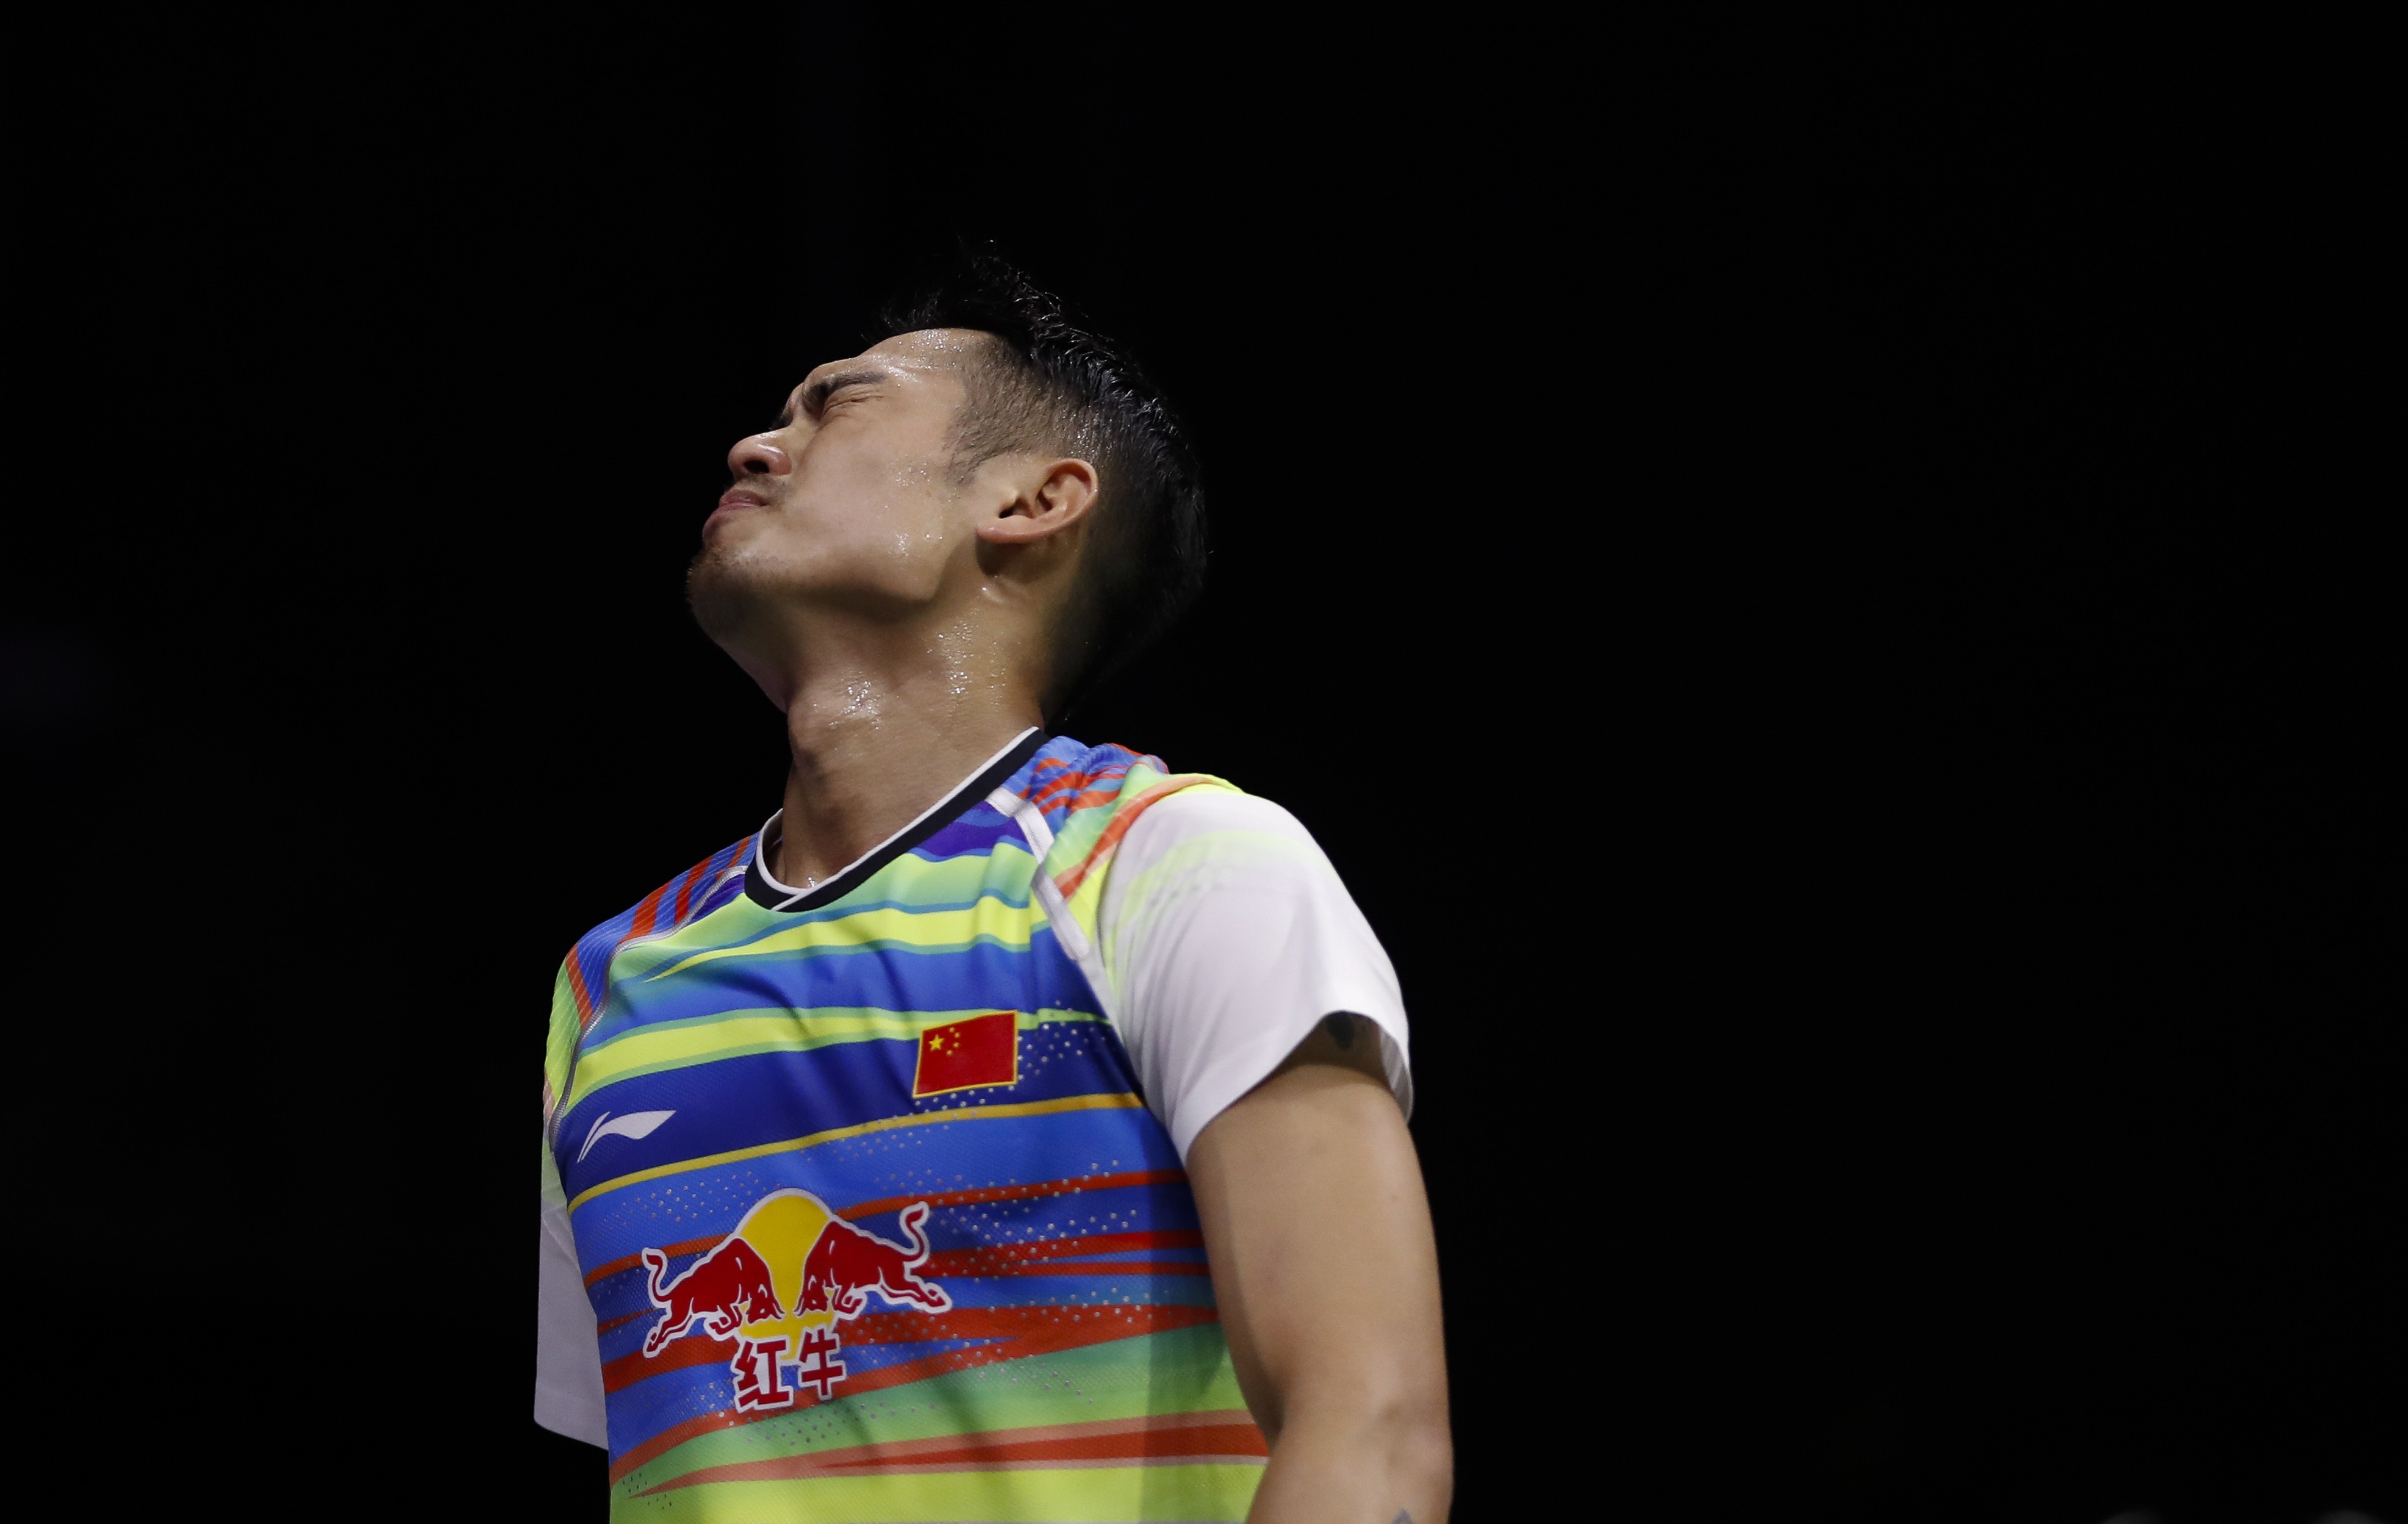 Lin Dan reacts during the final against Viktor Axelsen at BWF Badminton World Championships 2017 in Glasgow. Photo: Xinhua